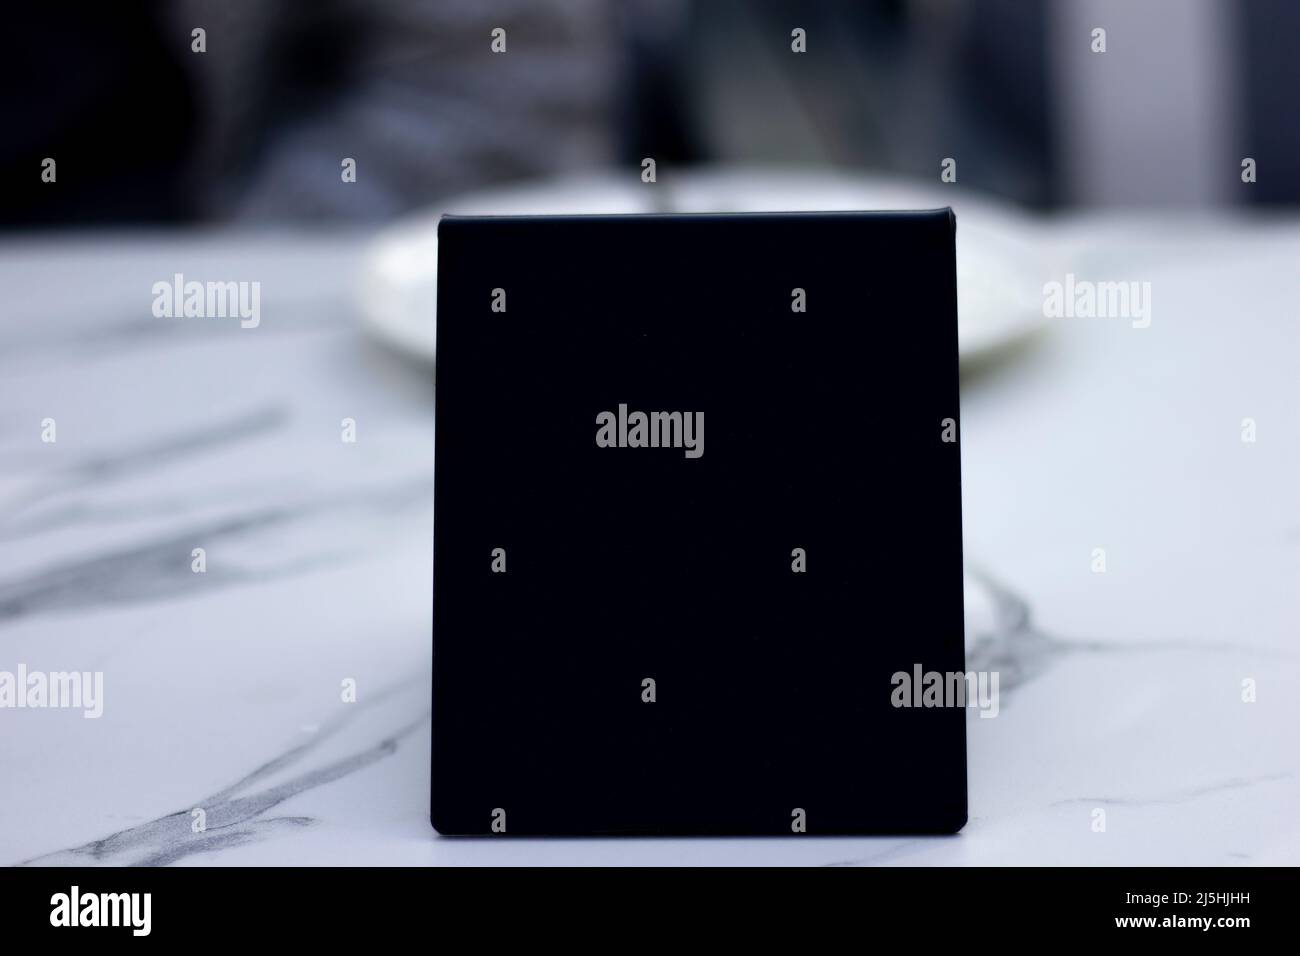 Restaurant themed abstract empty black isolated table. Can be used for QR or advertisement. Stock Photo